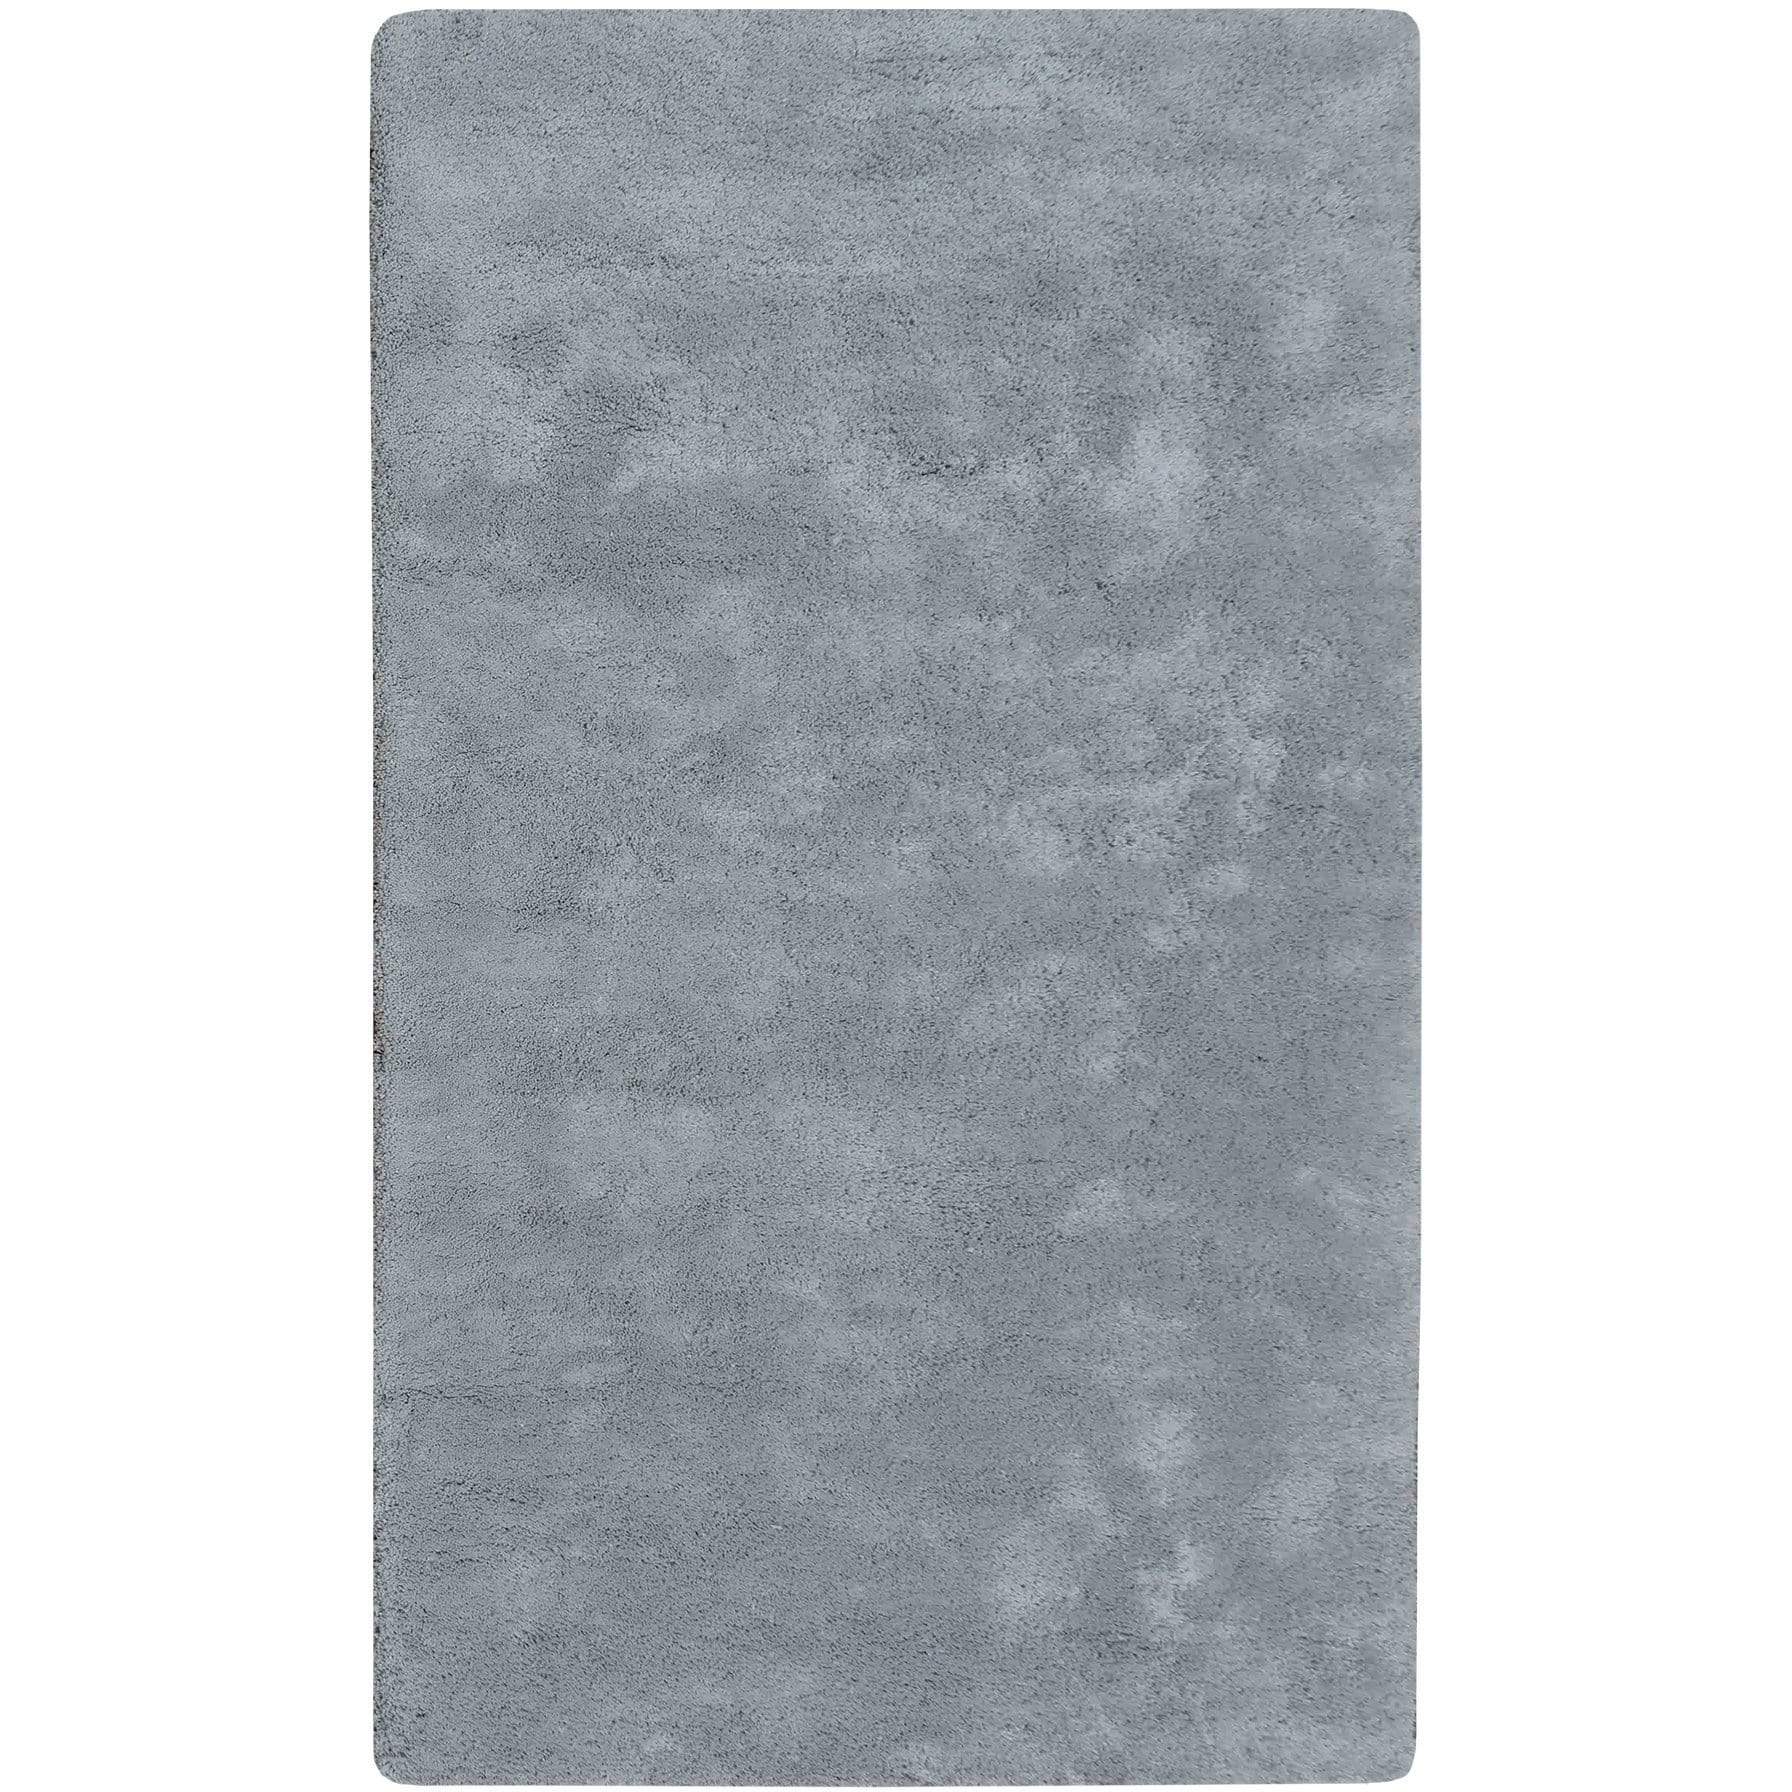 Rugs by Roo | Organic Weave Signature Grey Cotton Shag Rug-OW-SHGGRY-0508